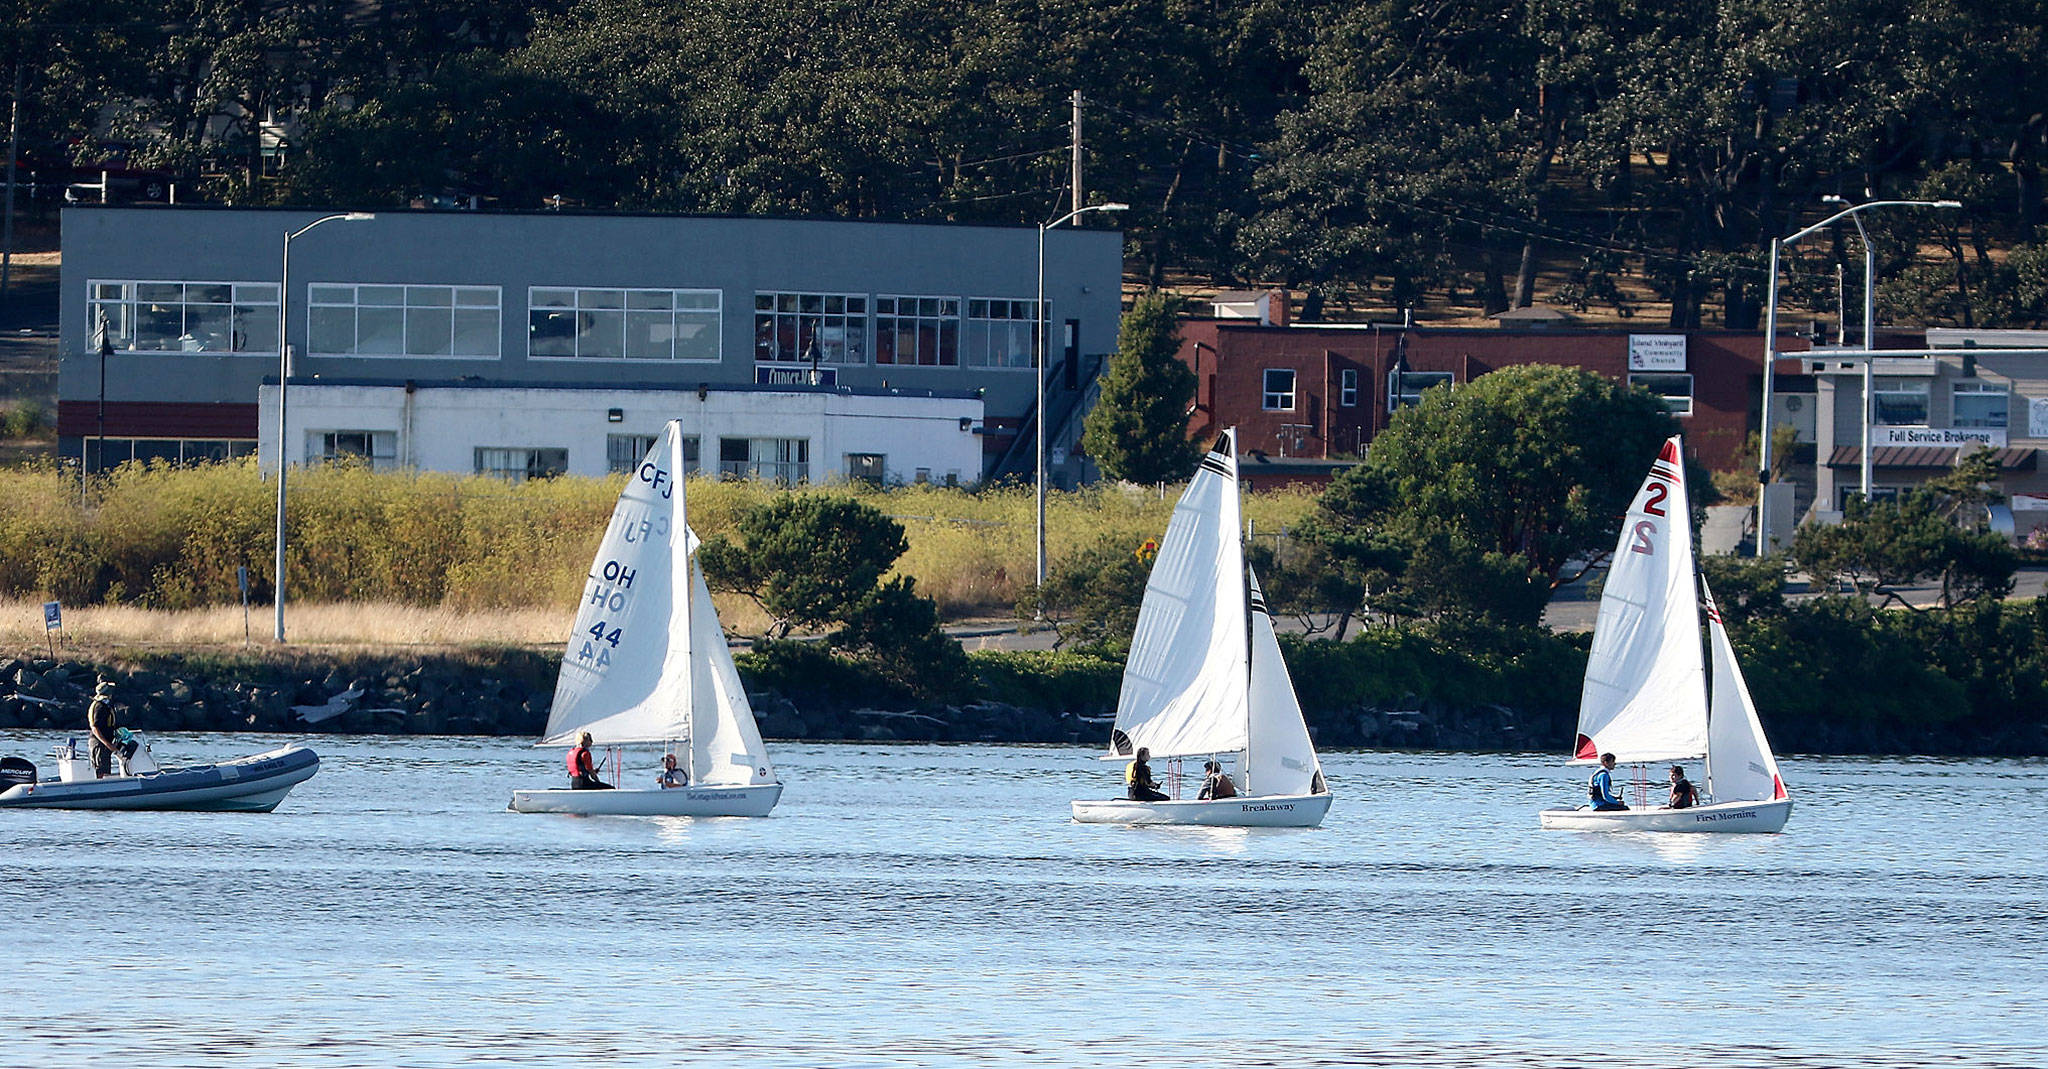 New Wildcat Sailing coach Shawn O’Connor, left, instructs his team during a recent practice. (Photo by John Fisken)